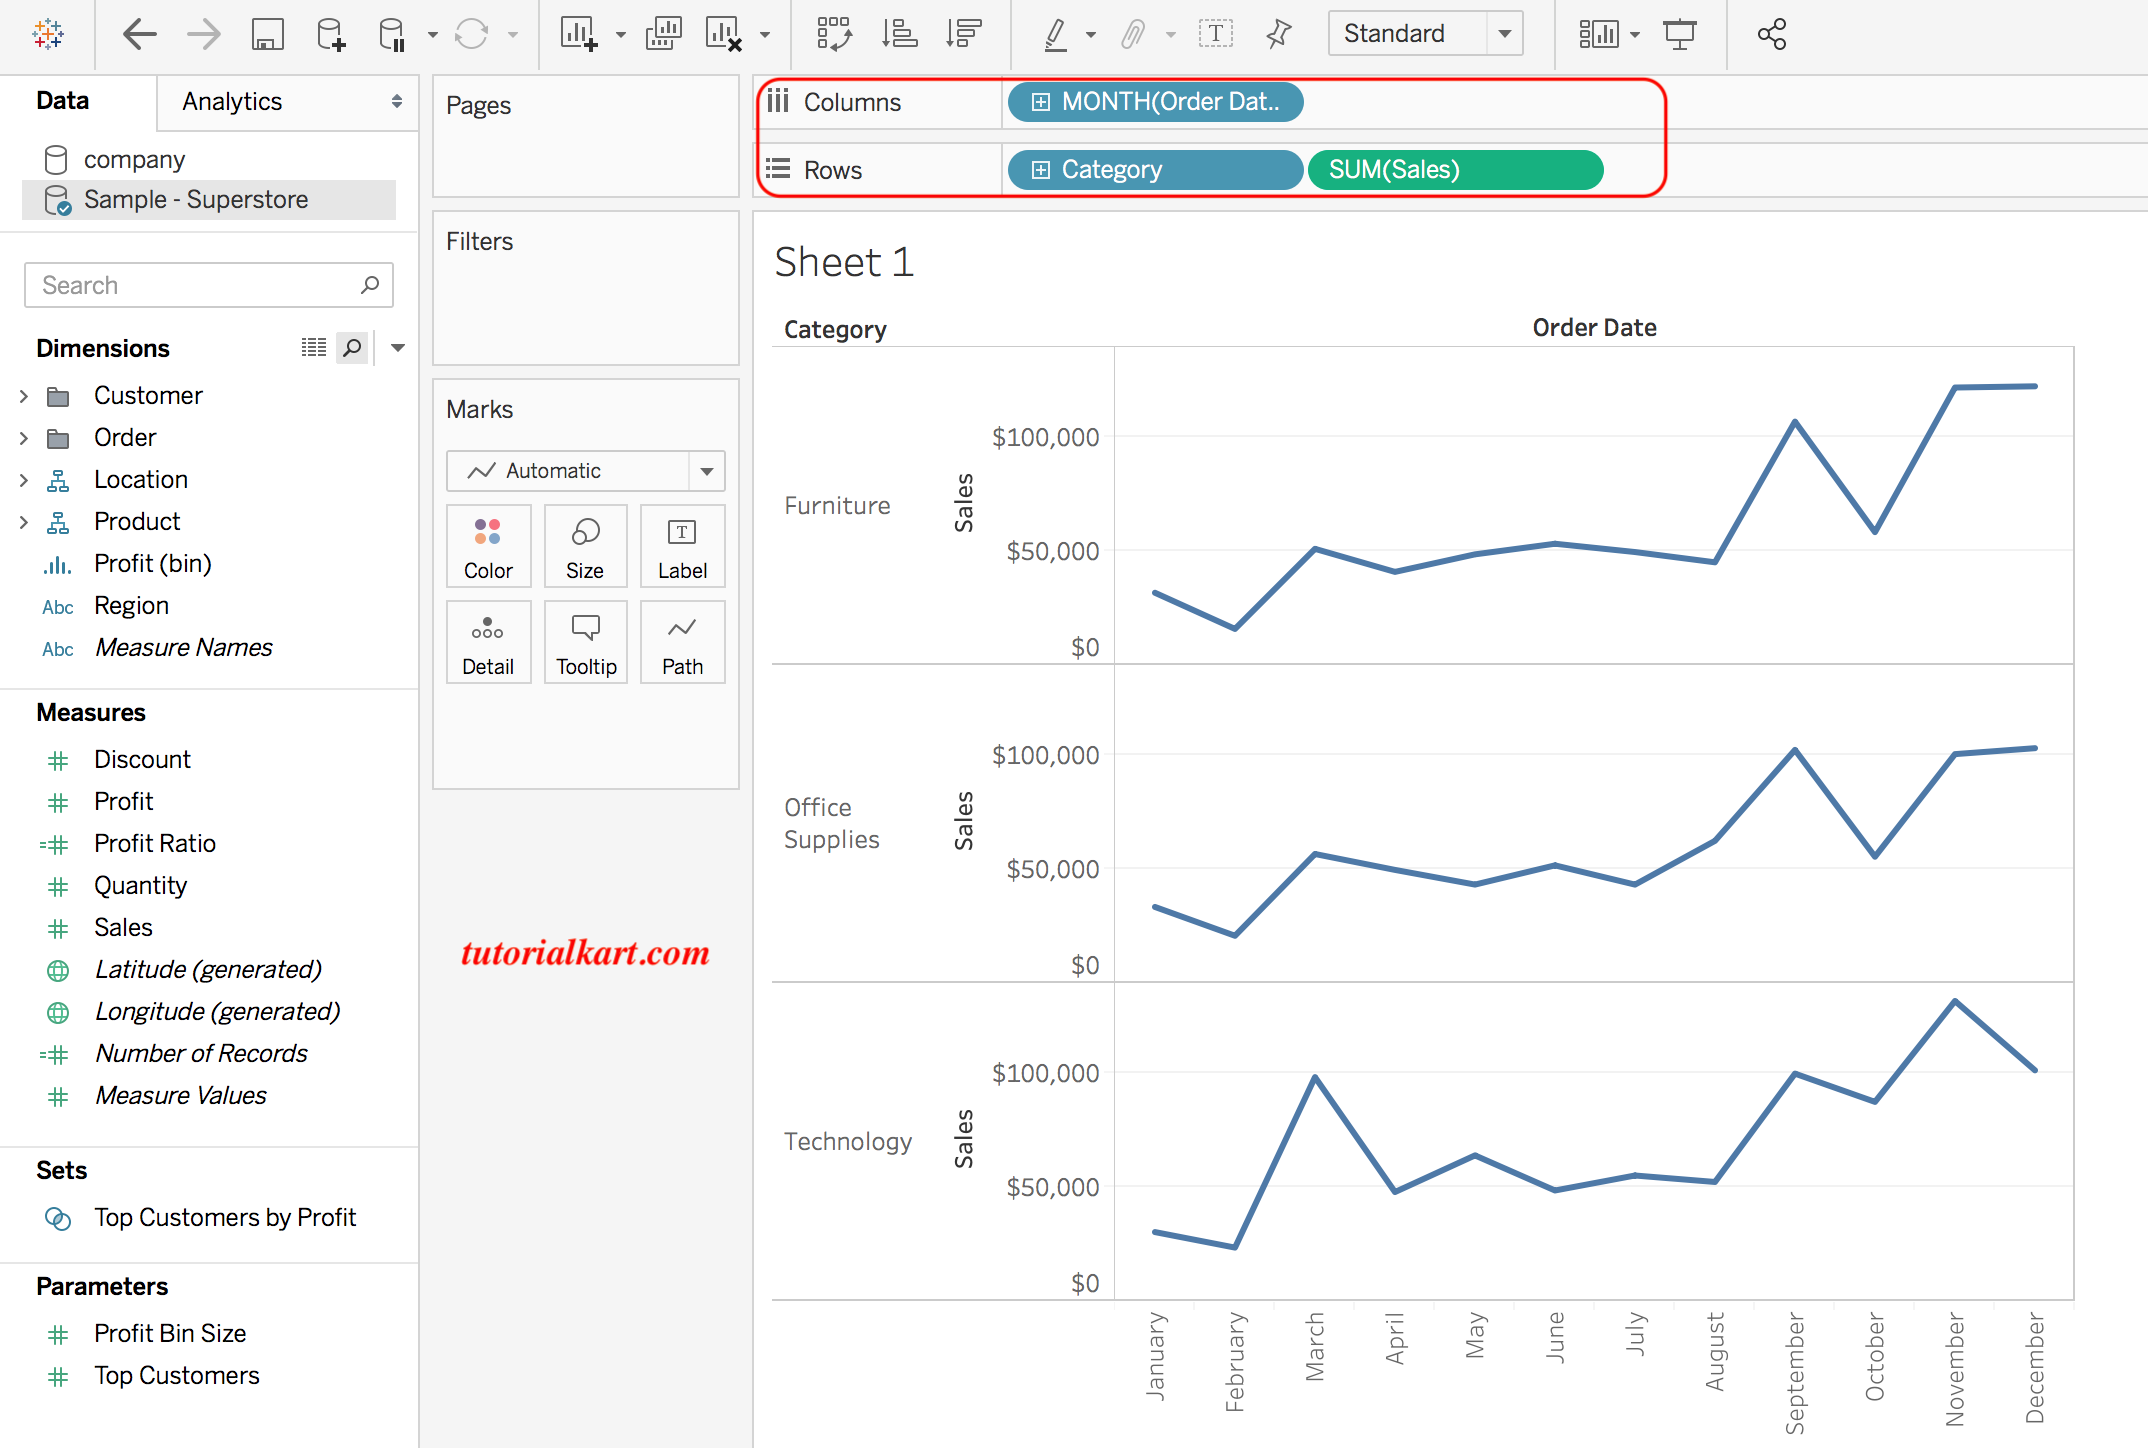 Getting started with tableau